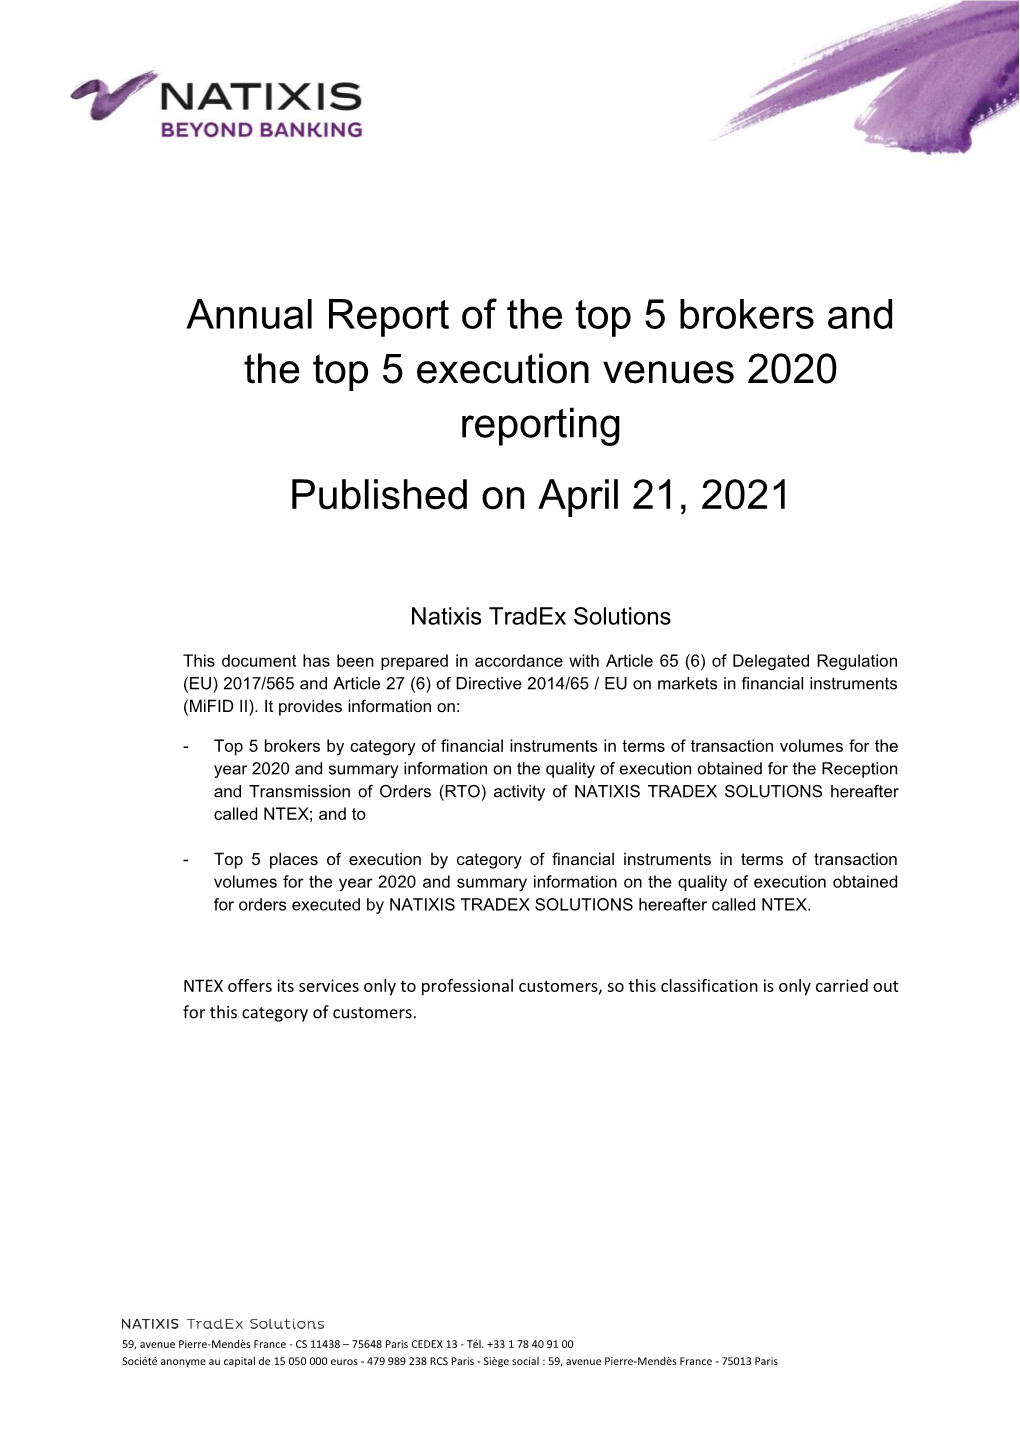 Annual Report of the Top 5 Brokers and the Top 5 Execution Venues 2020